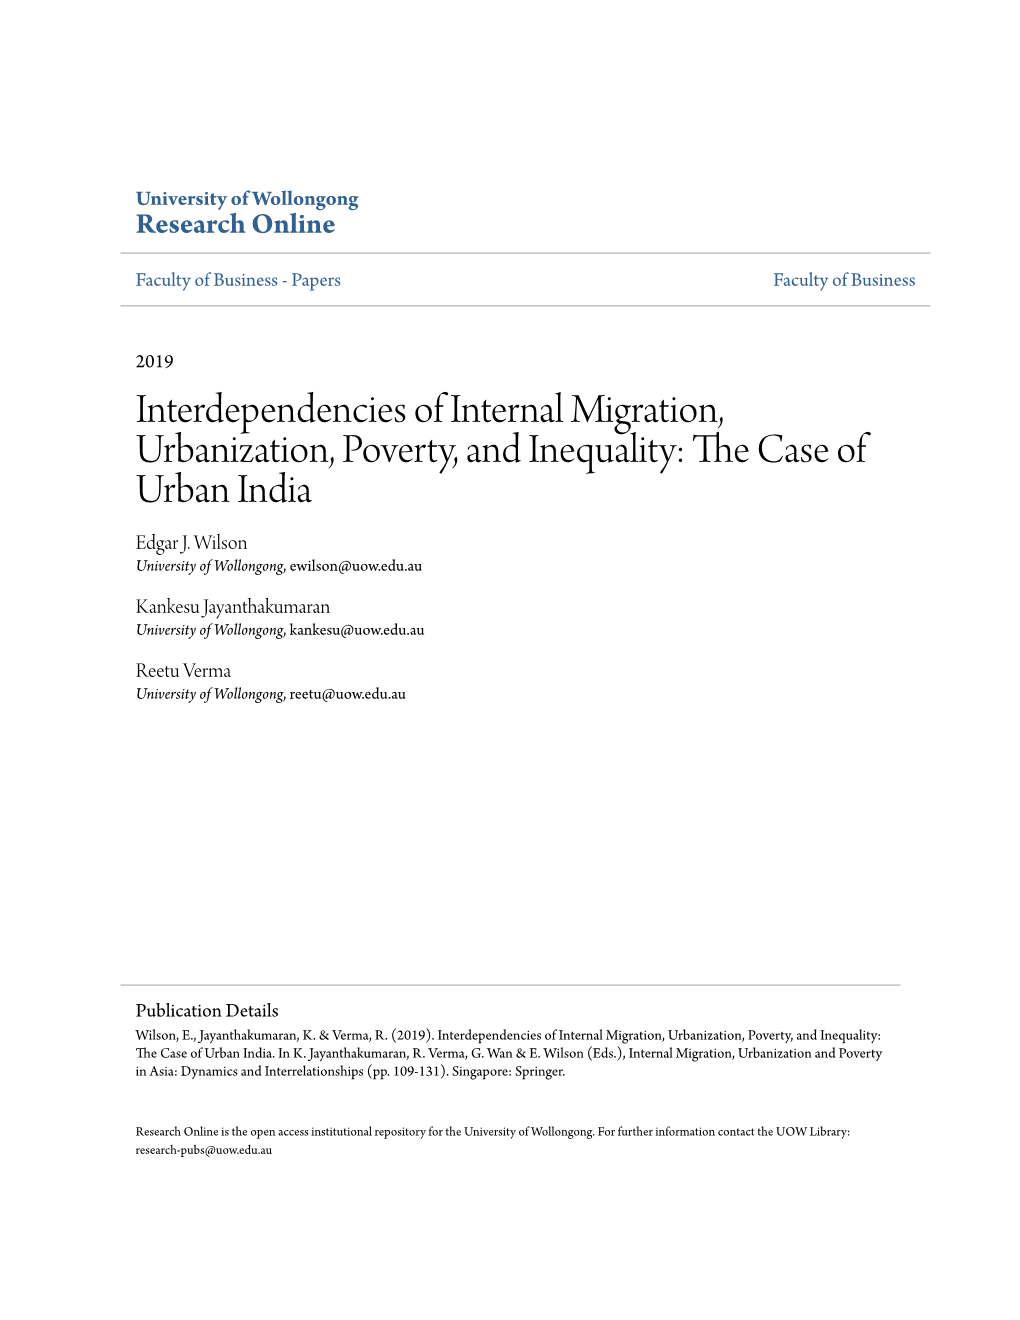 Interdependencies of Internal Migration, Urbanization, Poverty, and Inequality: the Ac Se of Urban India Edgar J